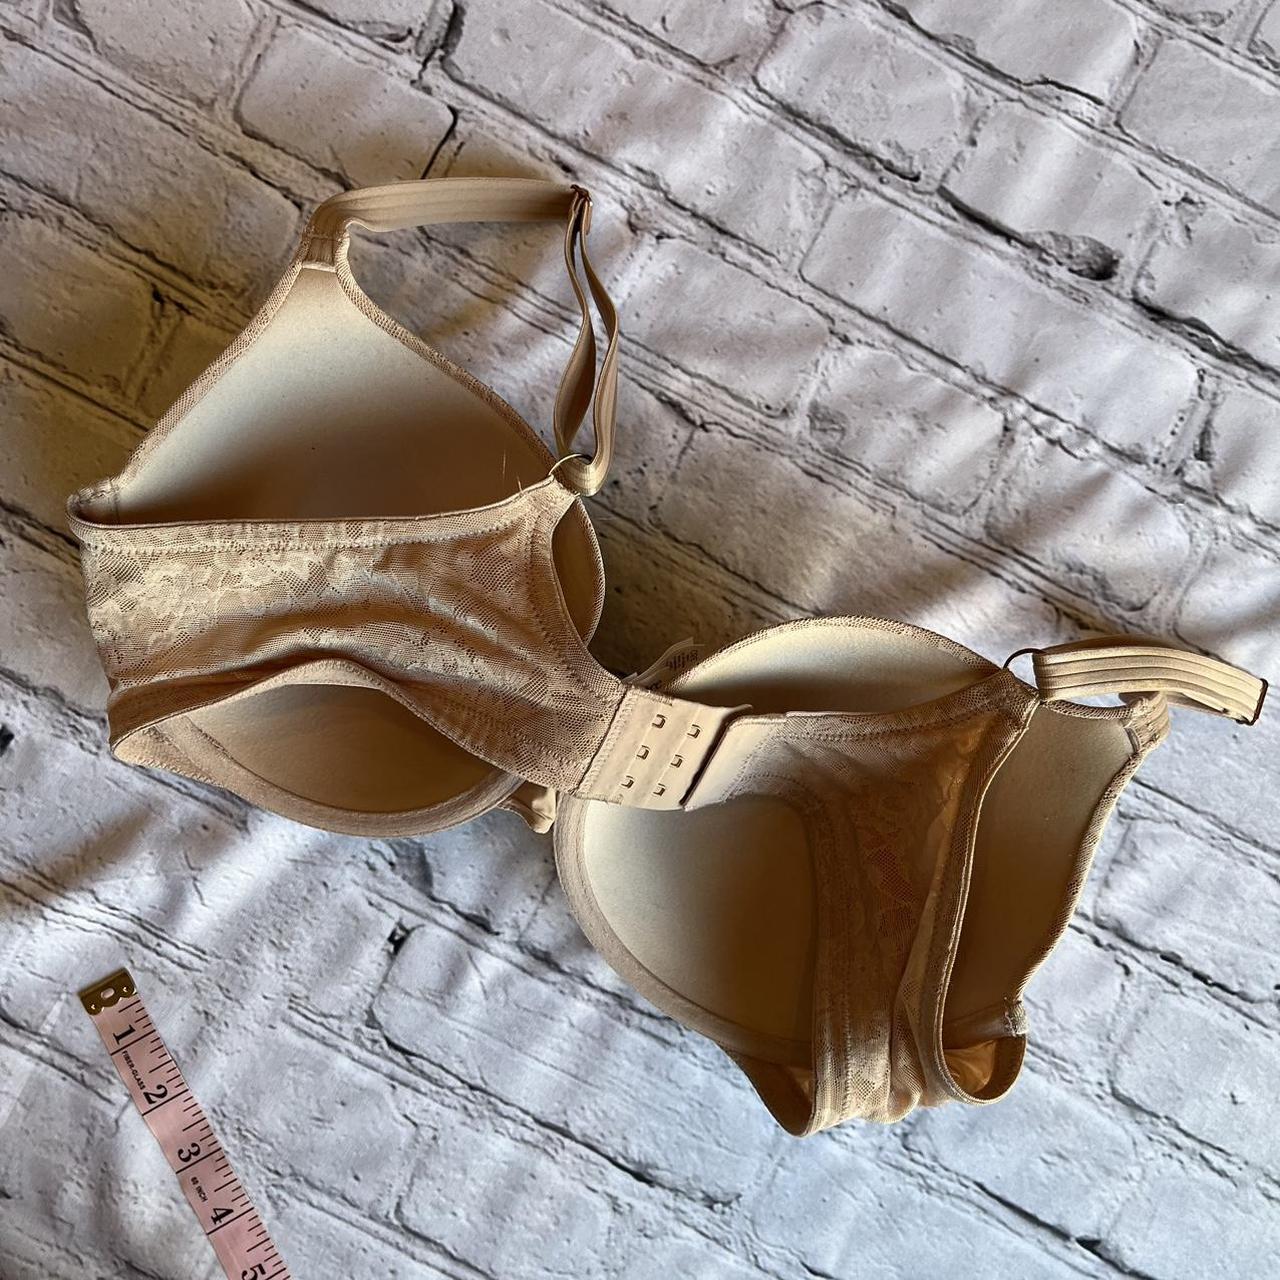 Le Mystere Nude Padded Bra 38D, Excellent condition